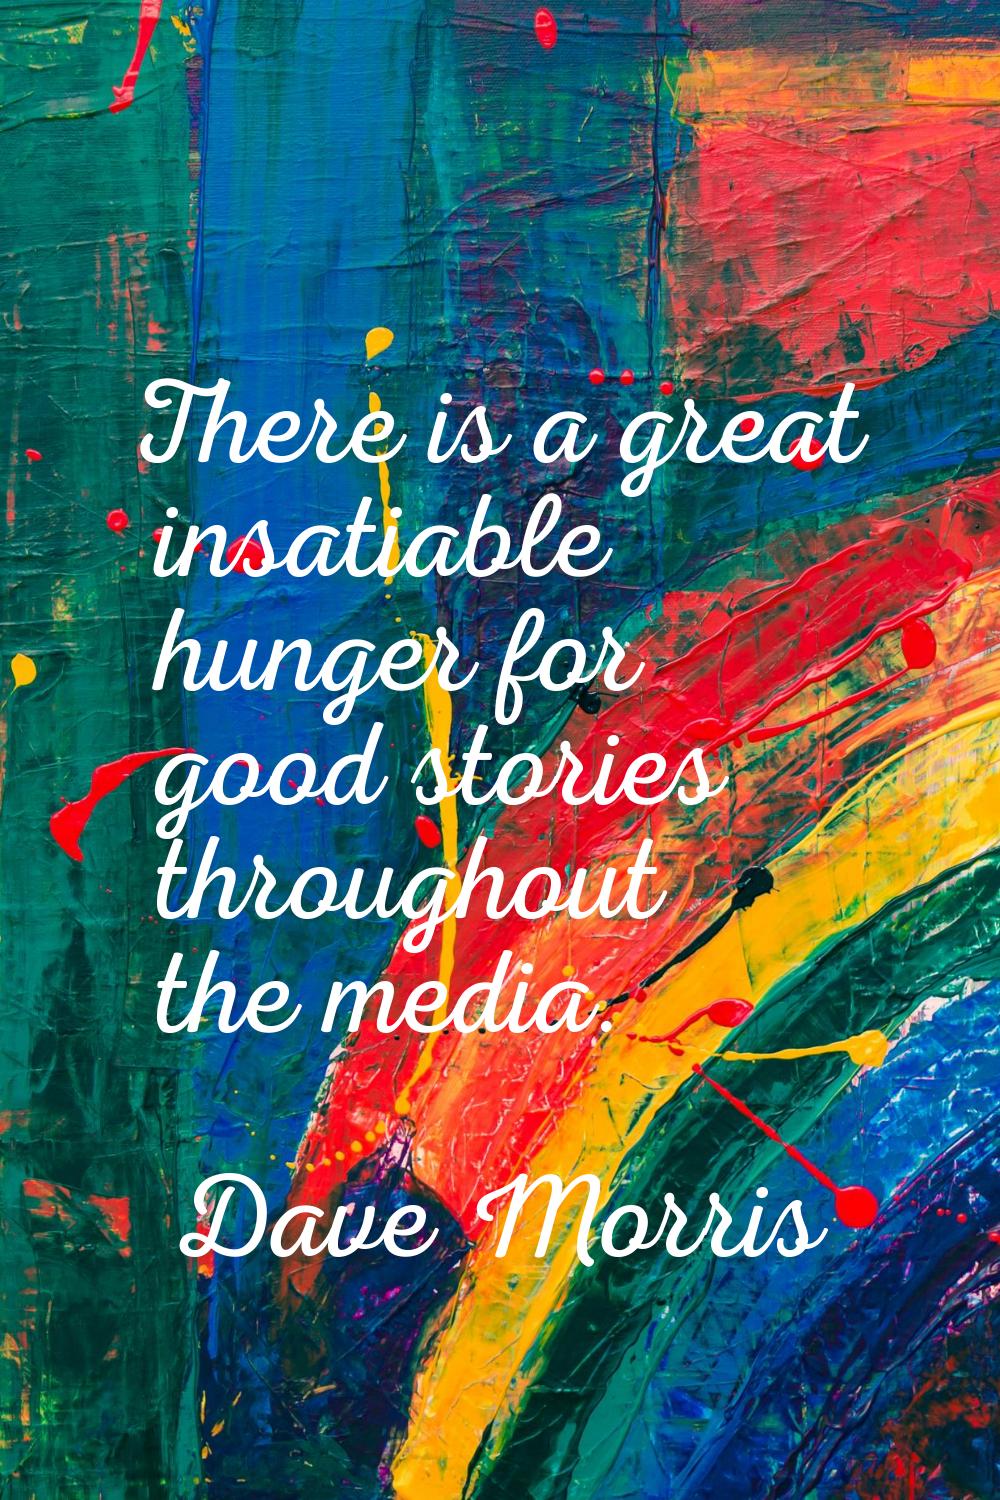 There is a great insatiable hunger for good stories throughout the media.